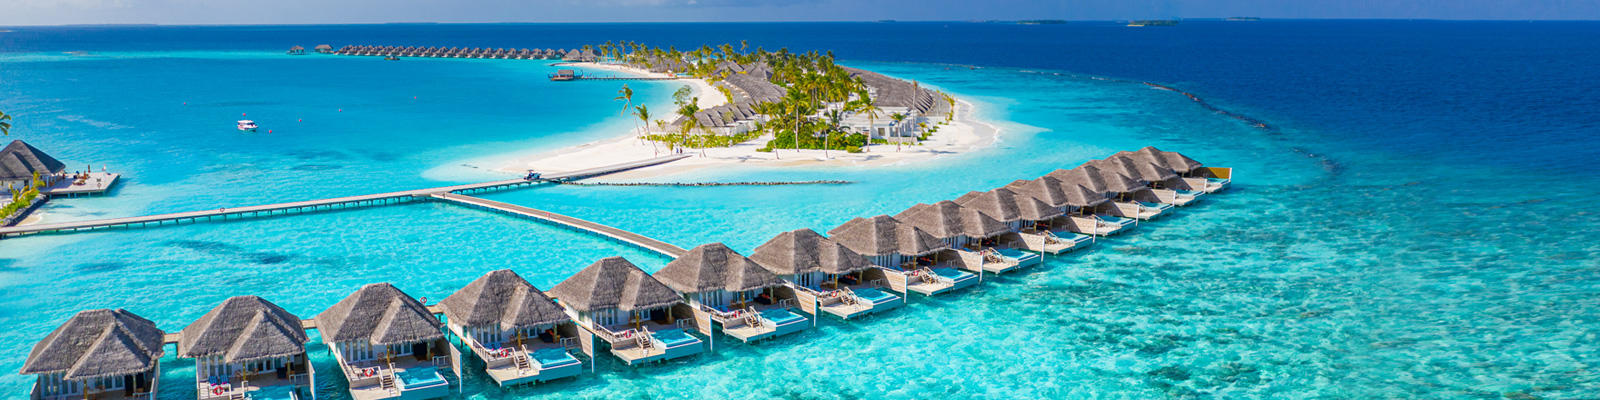 A view of oversea bungalows in the Maldives, which can be experienced with a holiday package from Flight Centre.